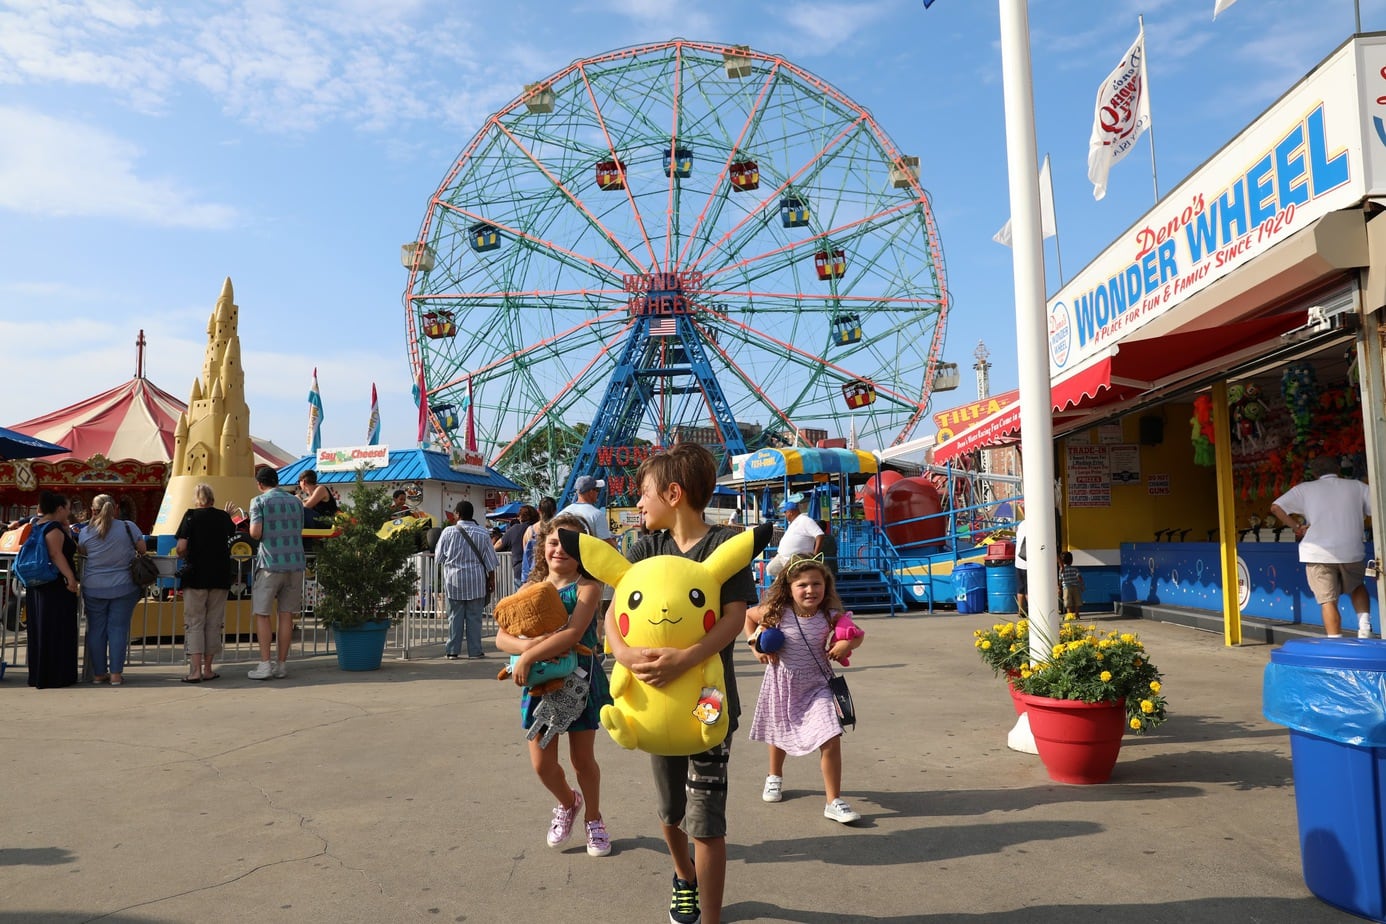 The Best Beaches in NYC - Coney Island